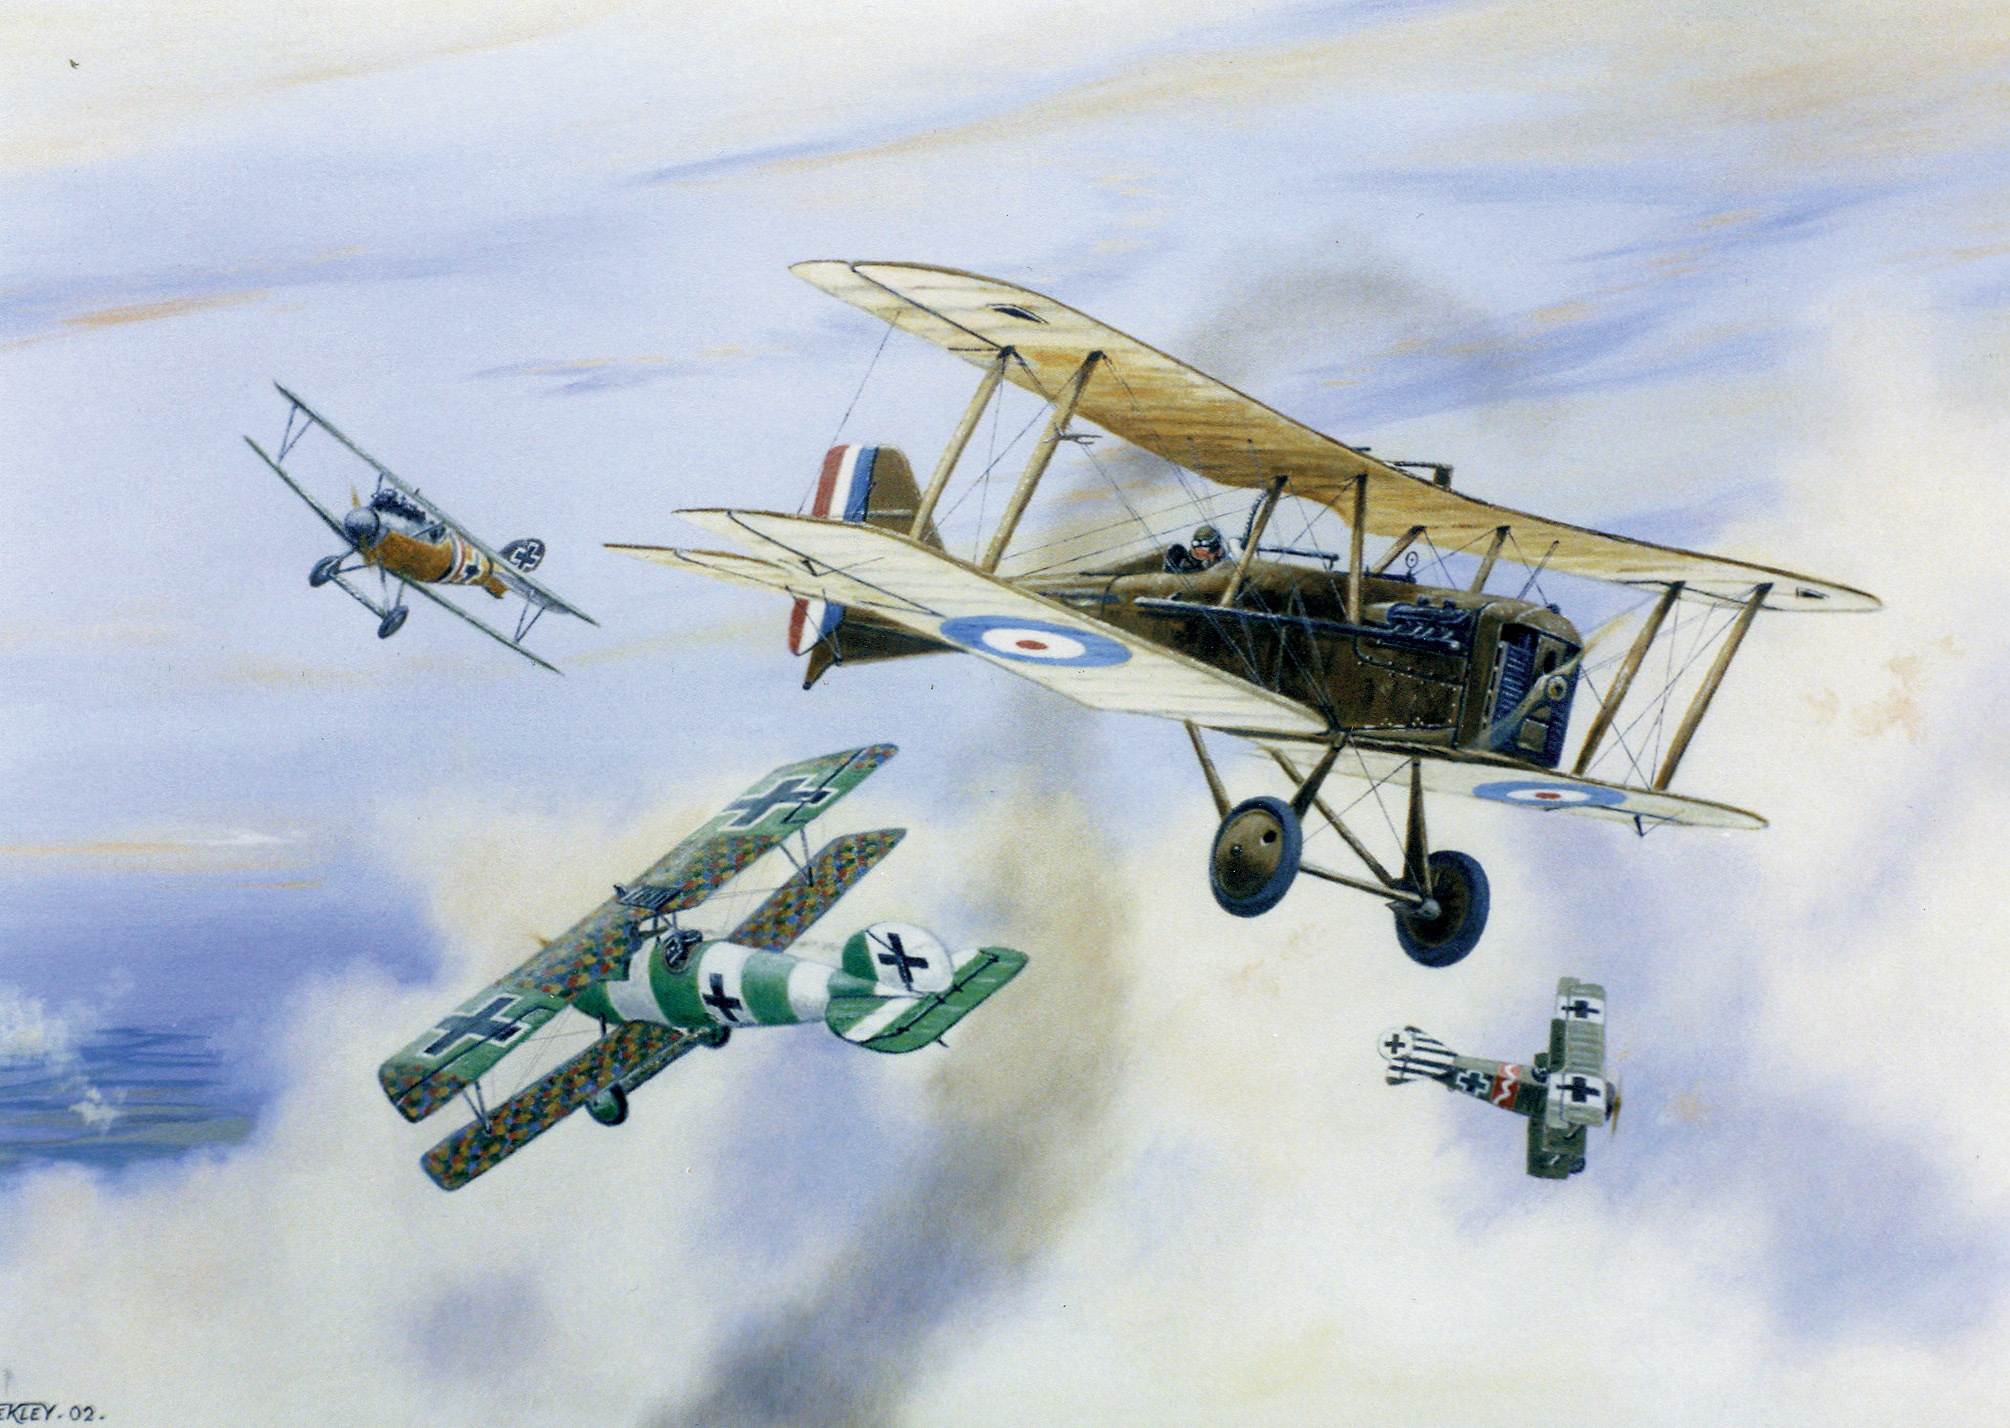 Mike Mannock mixes it up with three German aircraft in this depiction of one of his fights. Mannock’s true record is difficult to determine; he set up and wounded enemy aircraft for younger pilots to finish off.